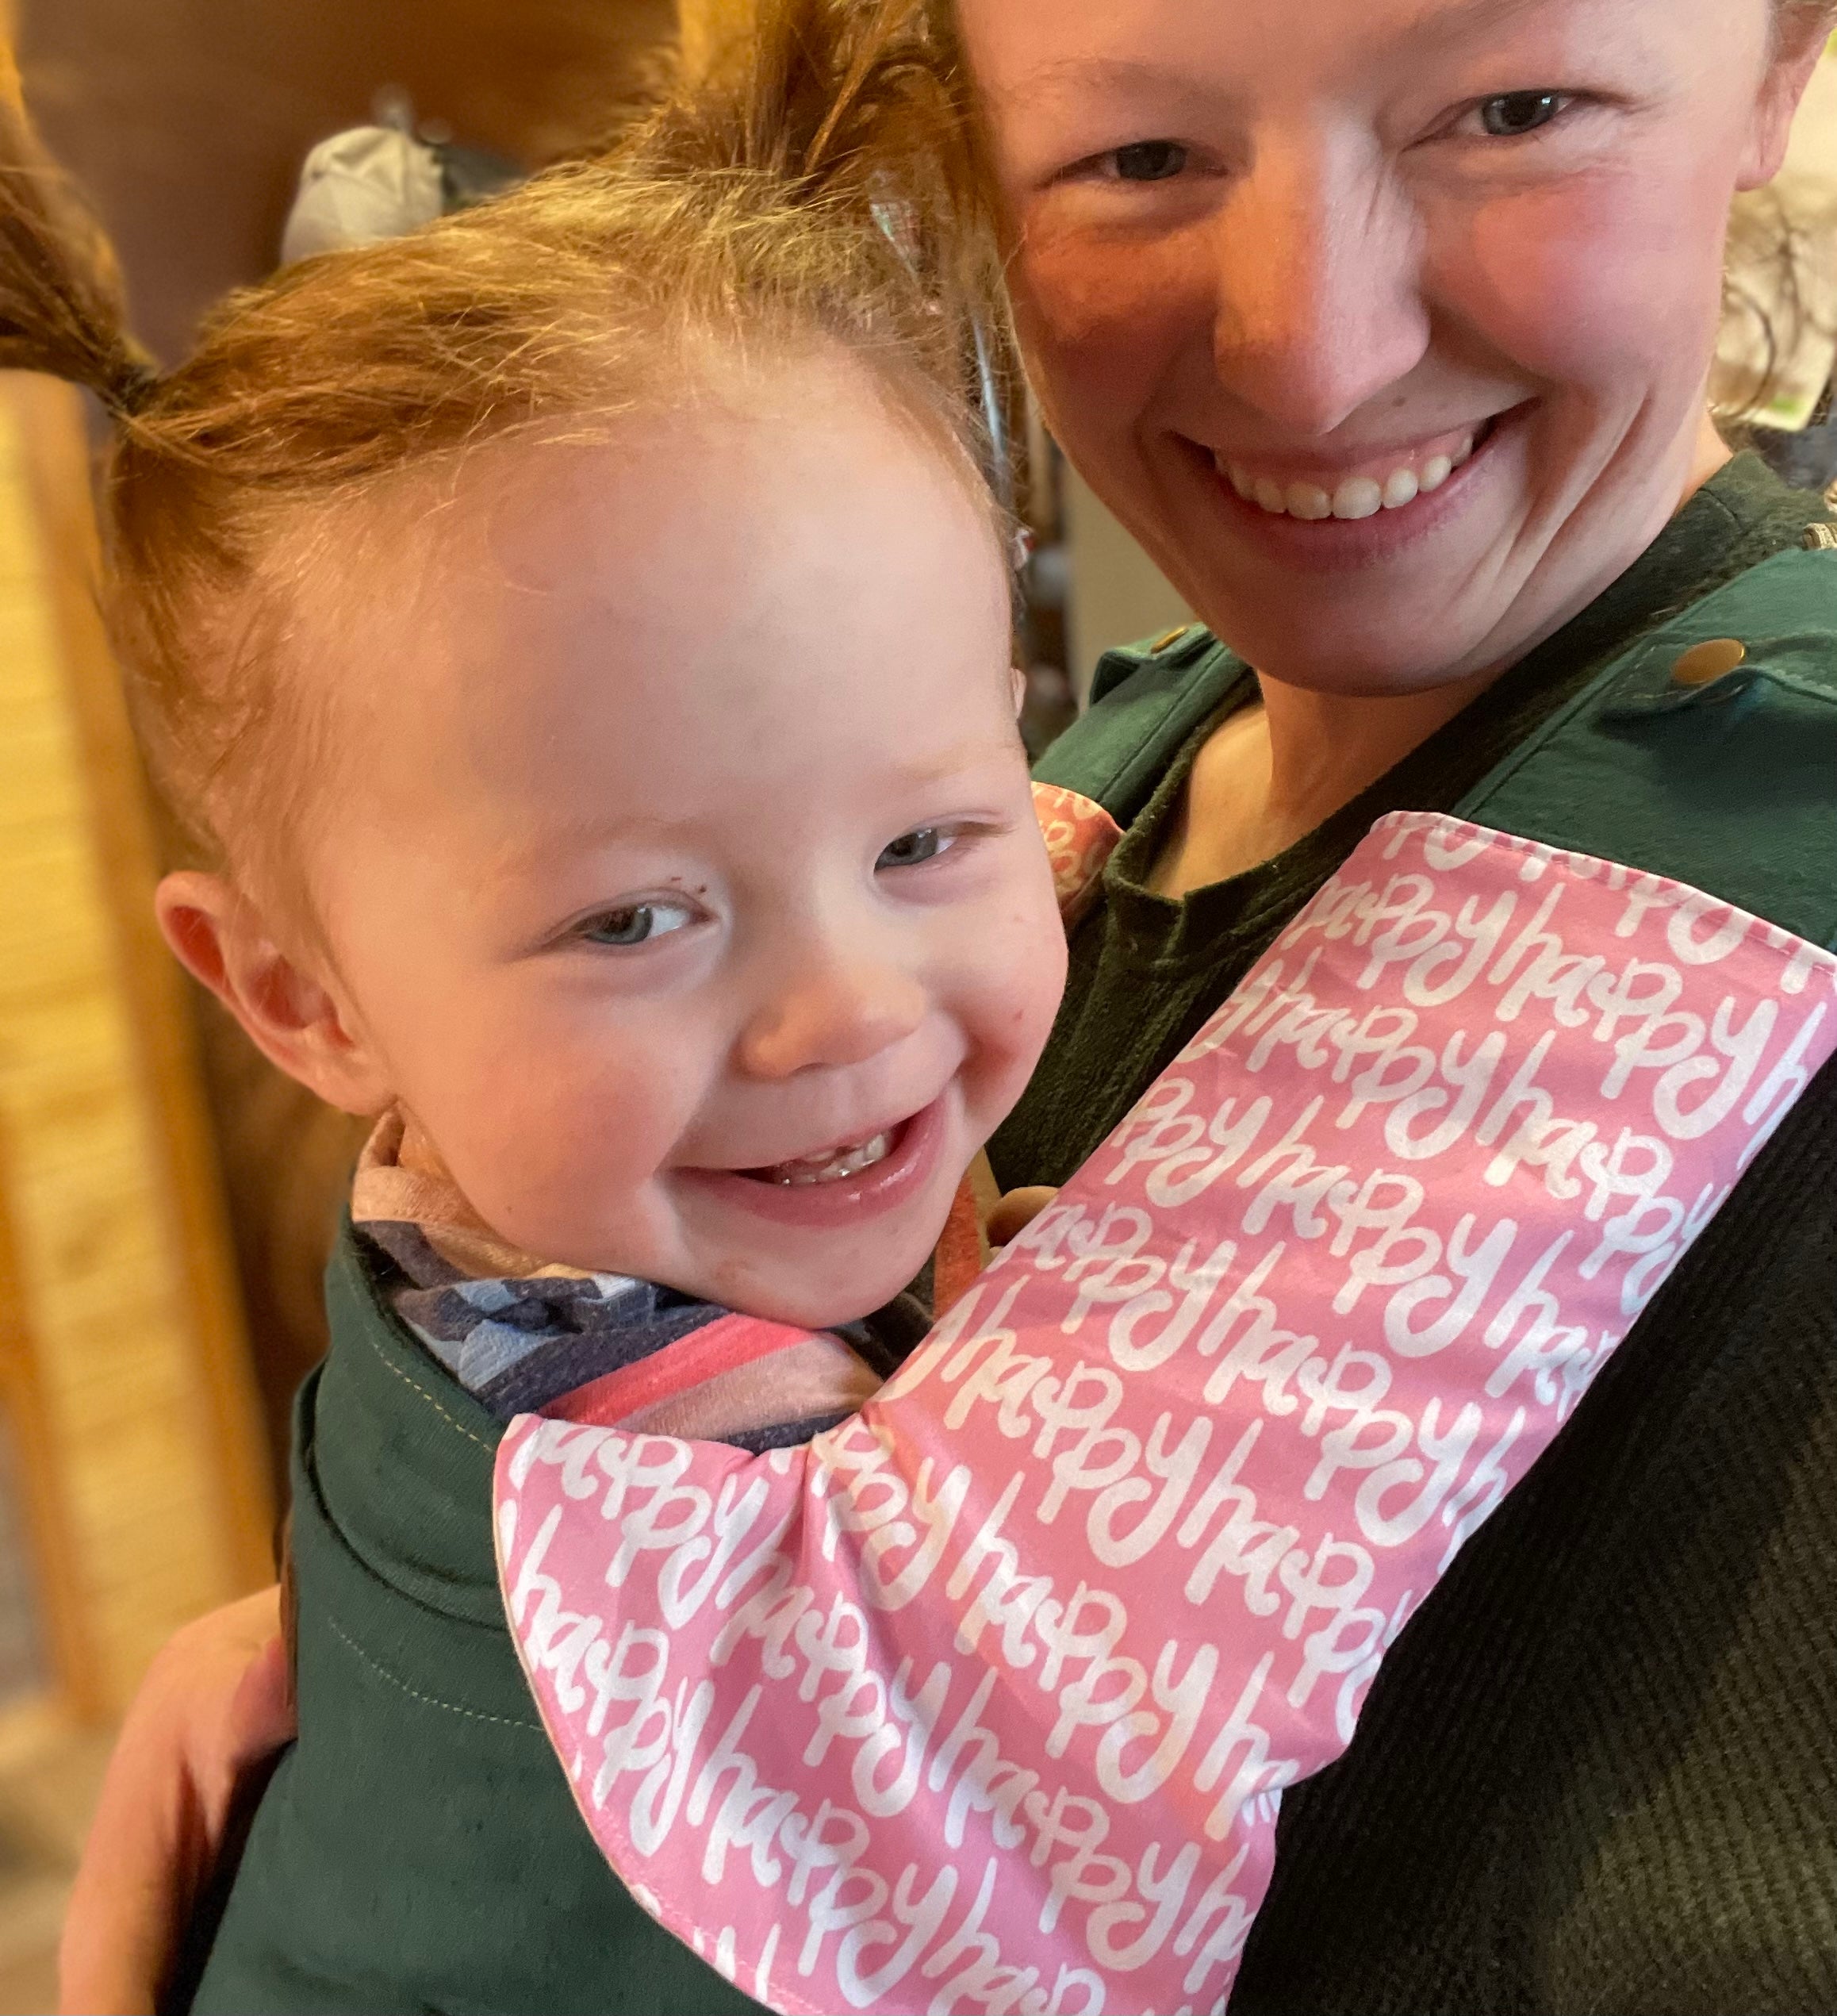 Suck pads on happy baby carrier